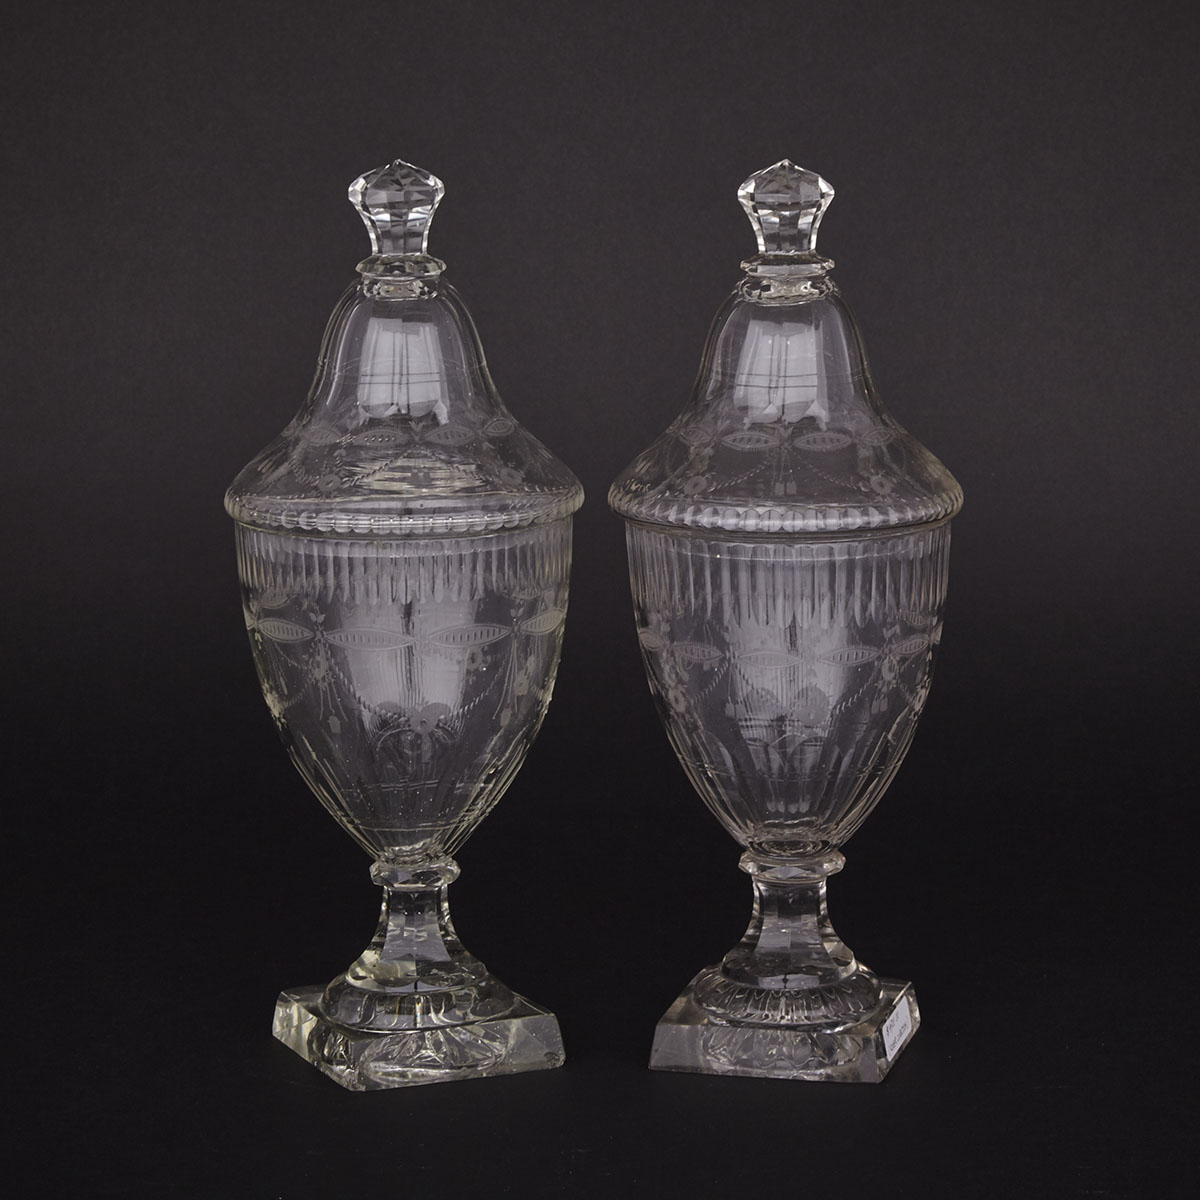 Pair of Continental Cut and Engraved Glass Sweetmeat Vases and Covers, possibly Vonêche, c.1810